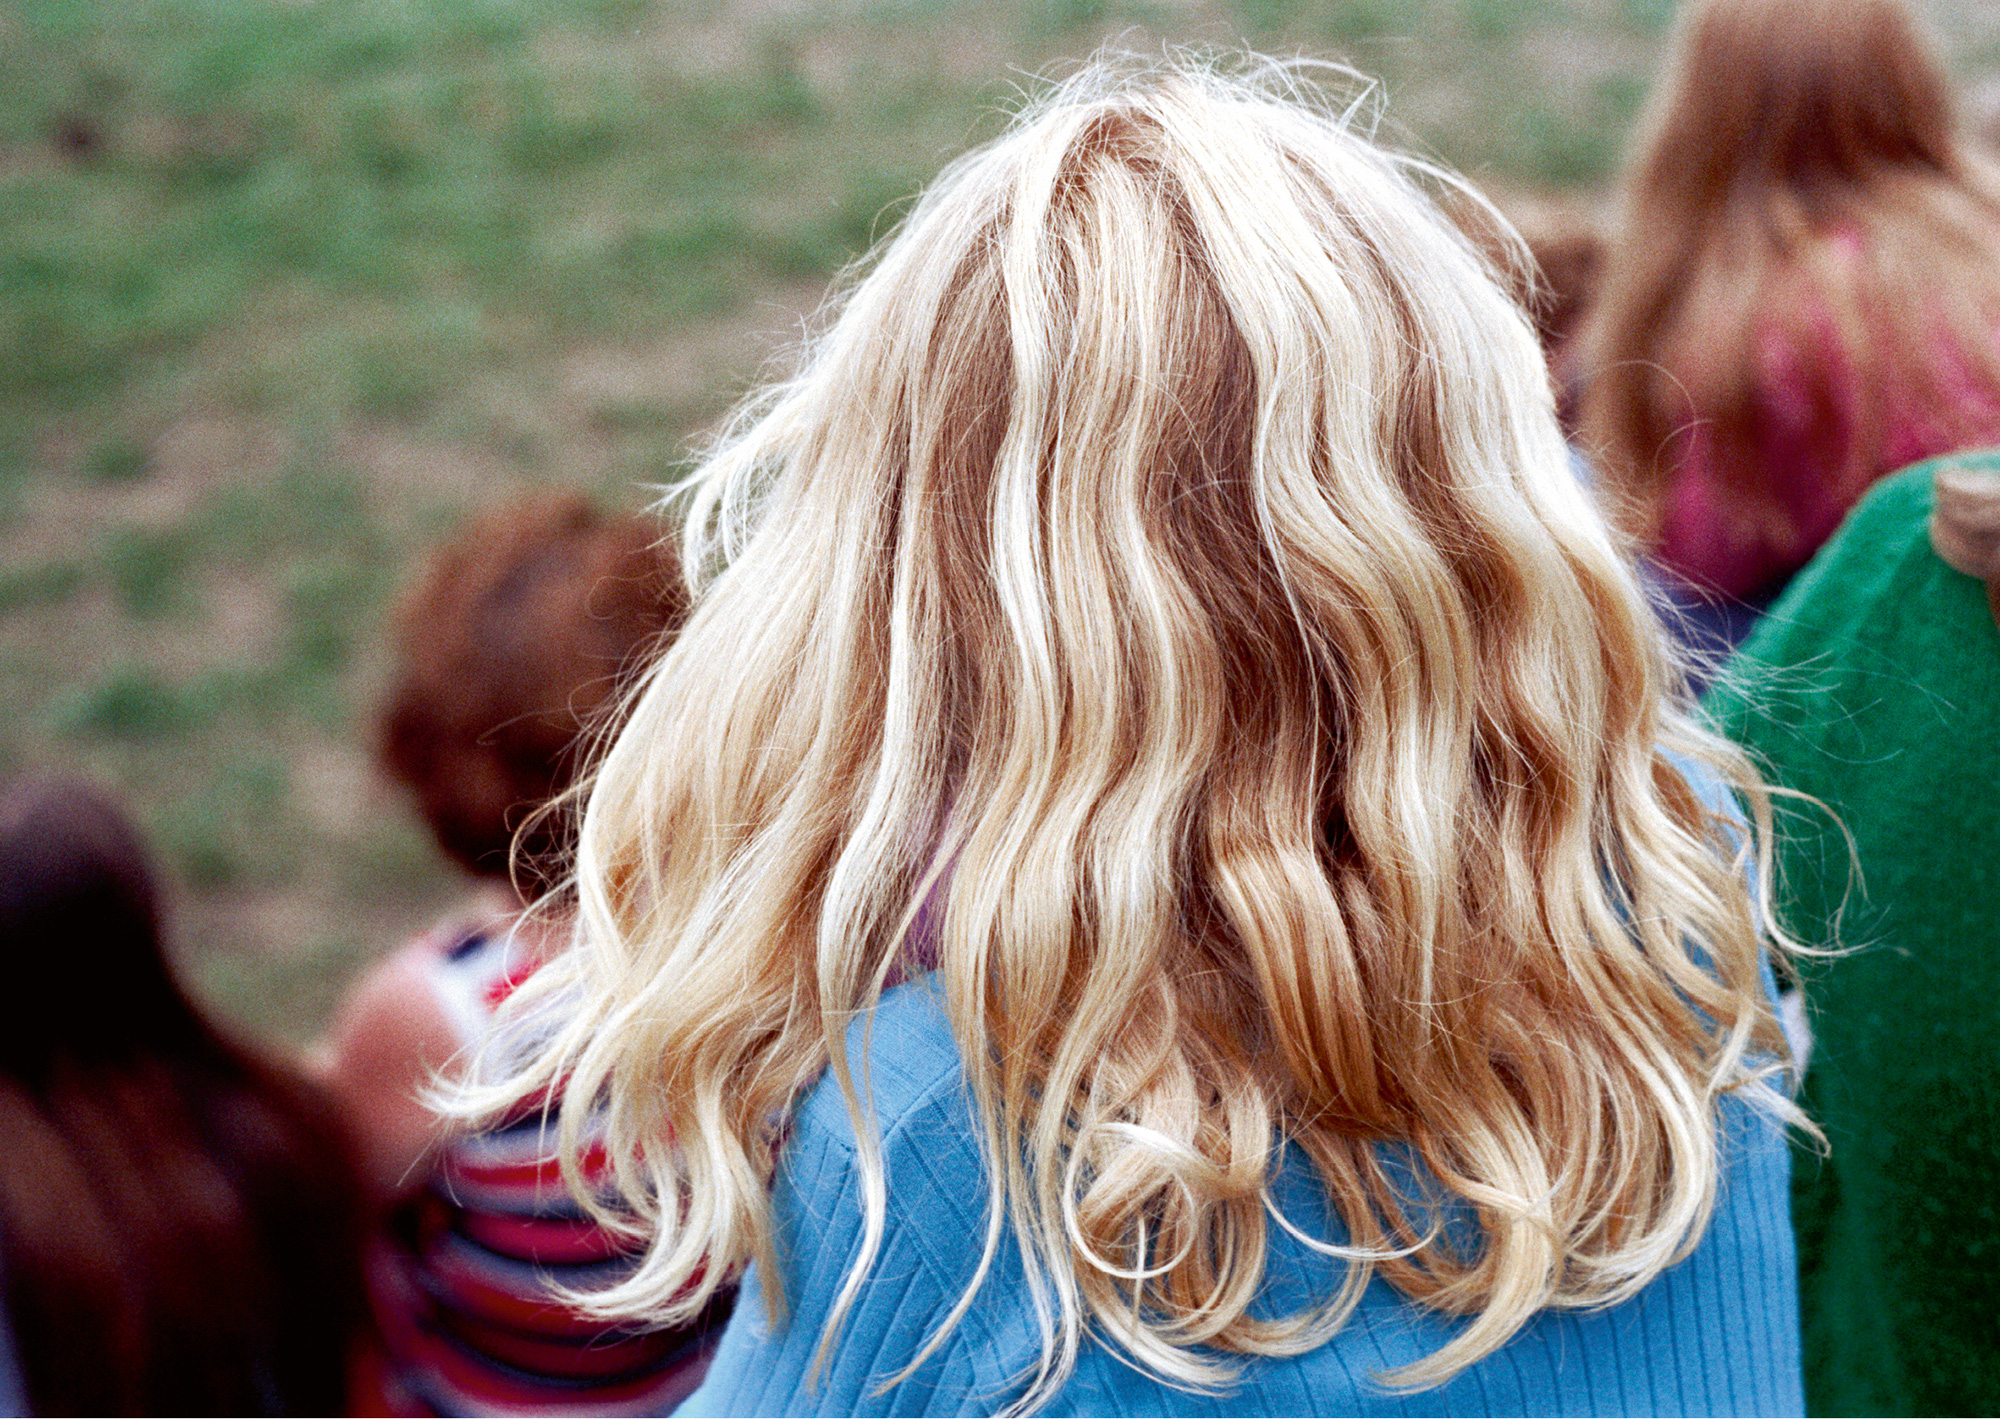 Nick DeWolf’s photograph of the back of a blonde child’s head. 